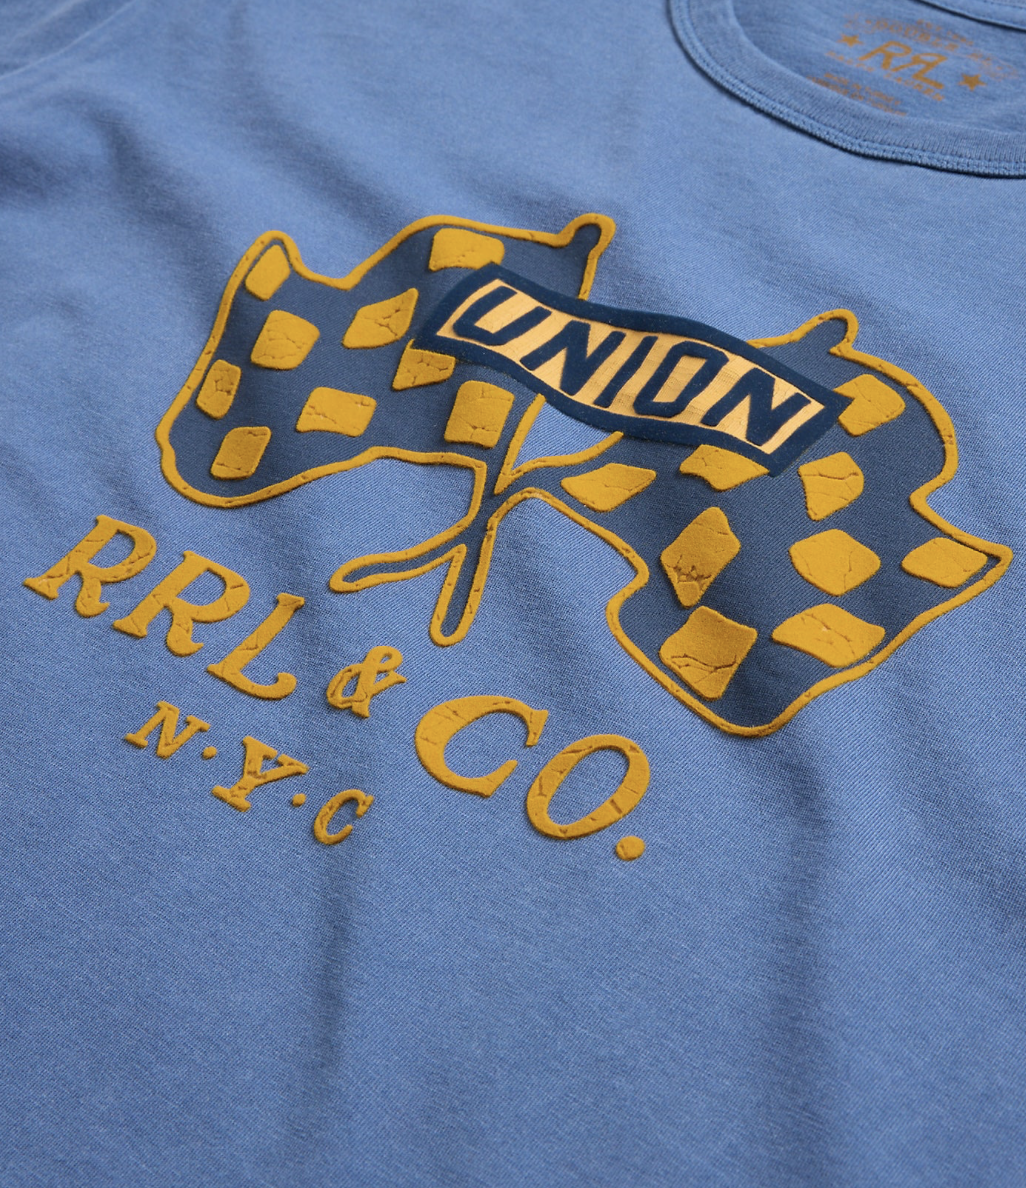 Short-Sleeve Cotton Jersey "RRL&CO" Graphic T-shirt